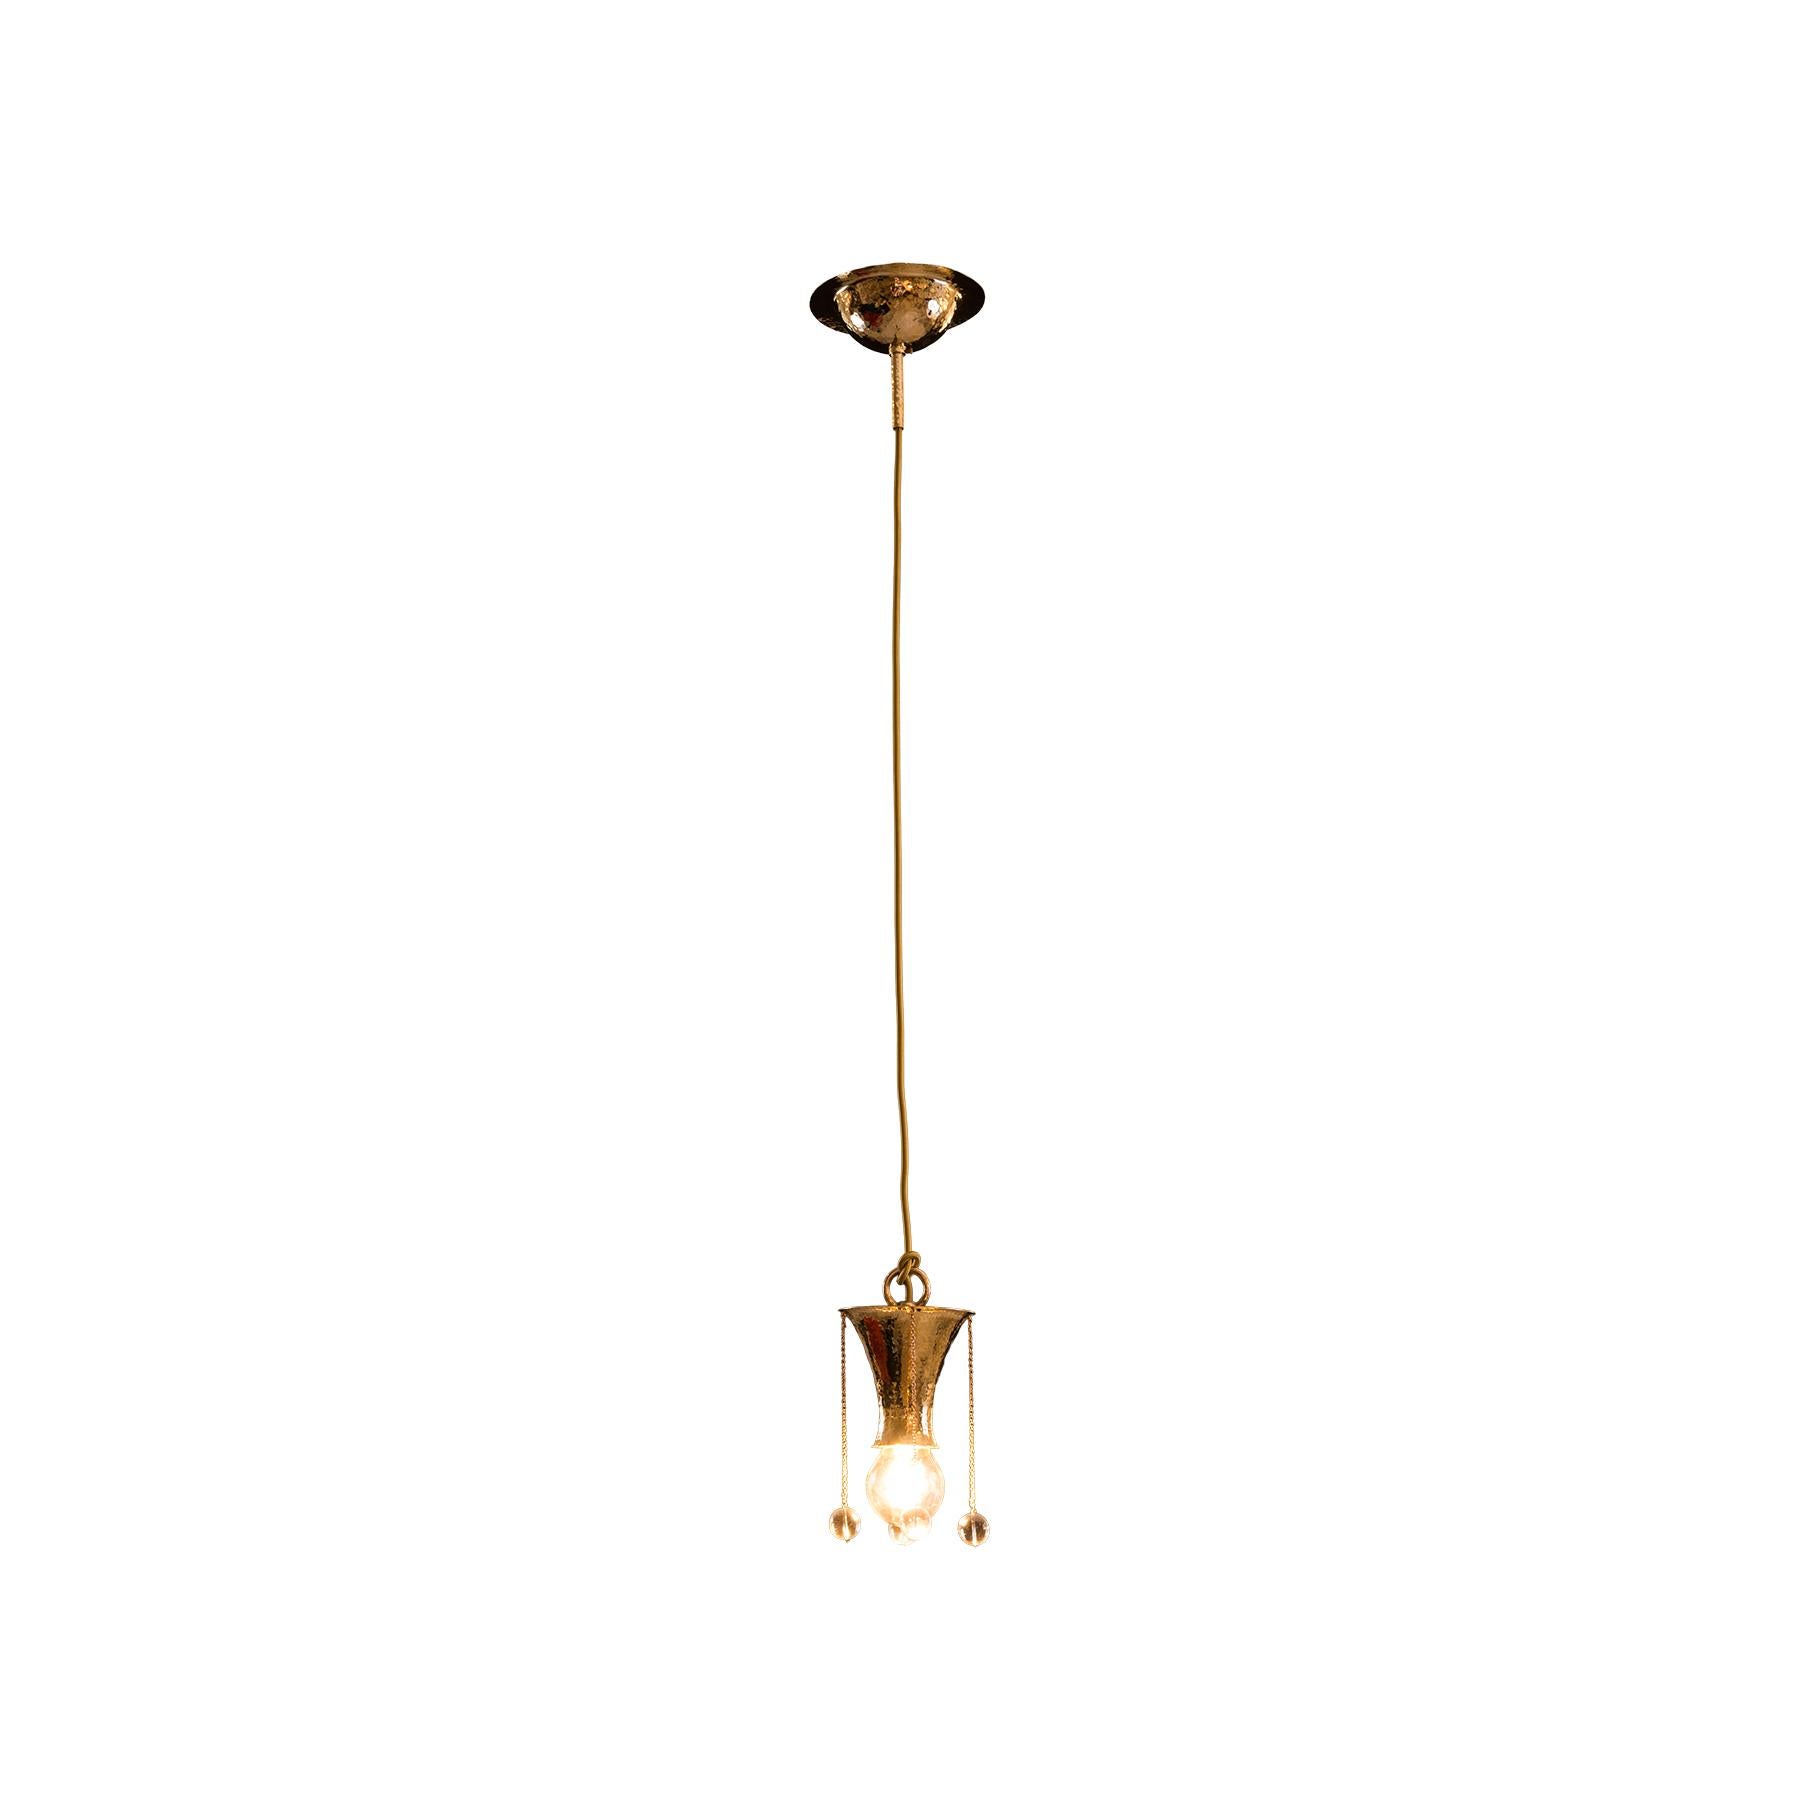 Austrian Hanging Lamp from the showroom of the Wiener Werkstaette used by Josef Hoffmann For Sale